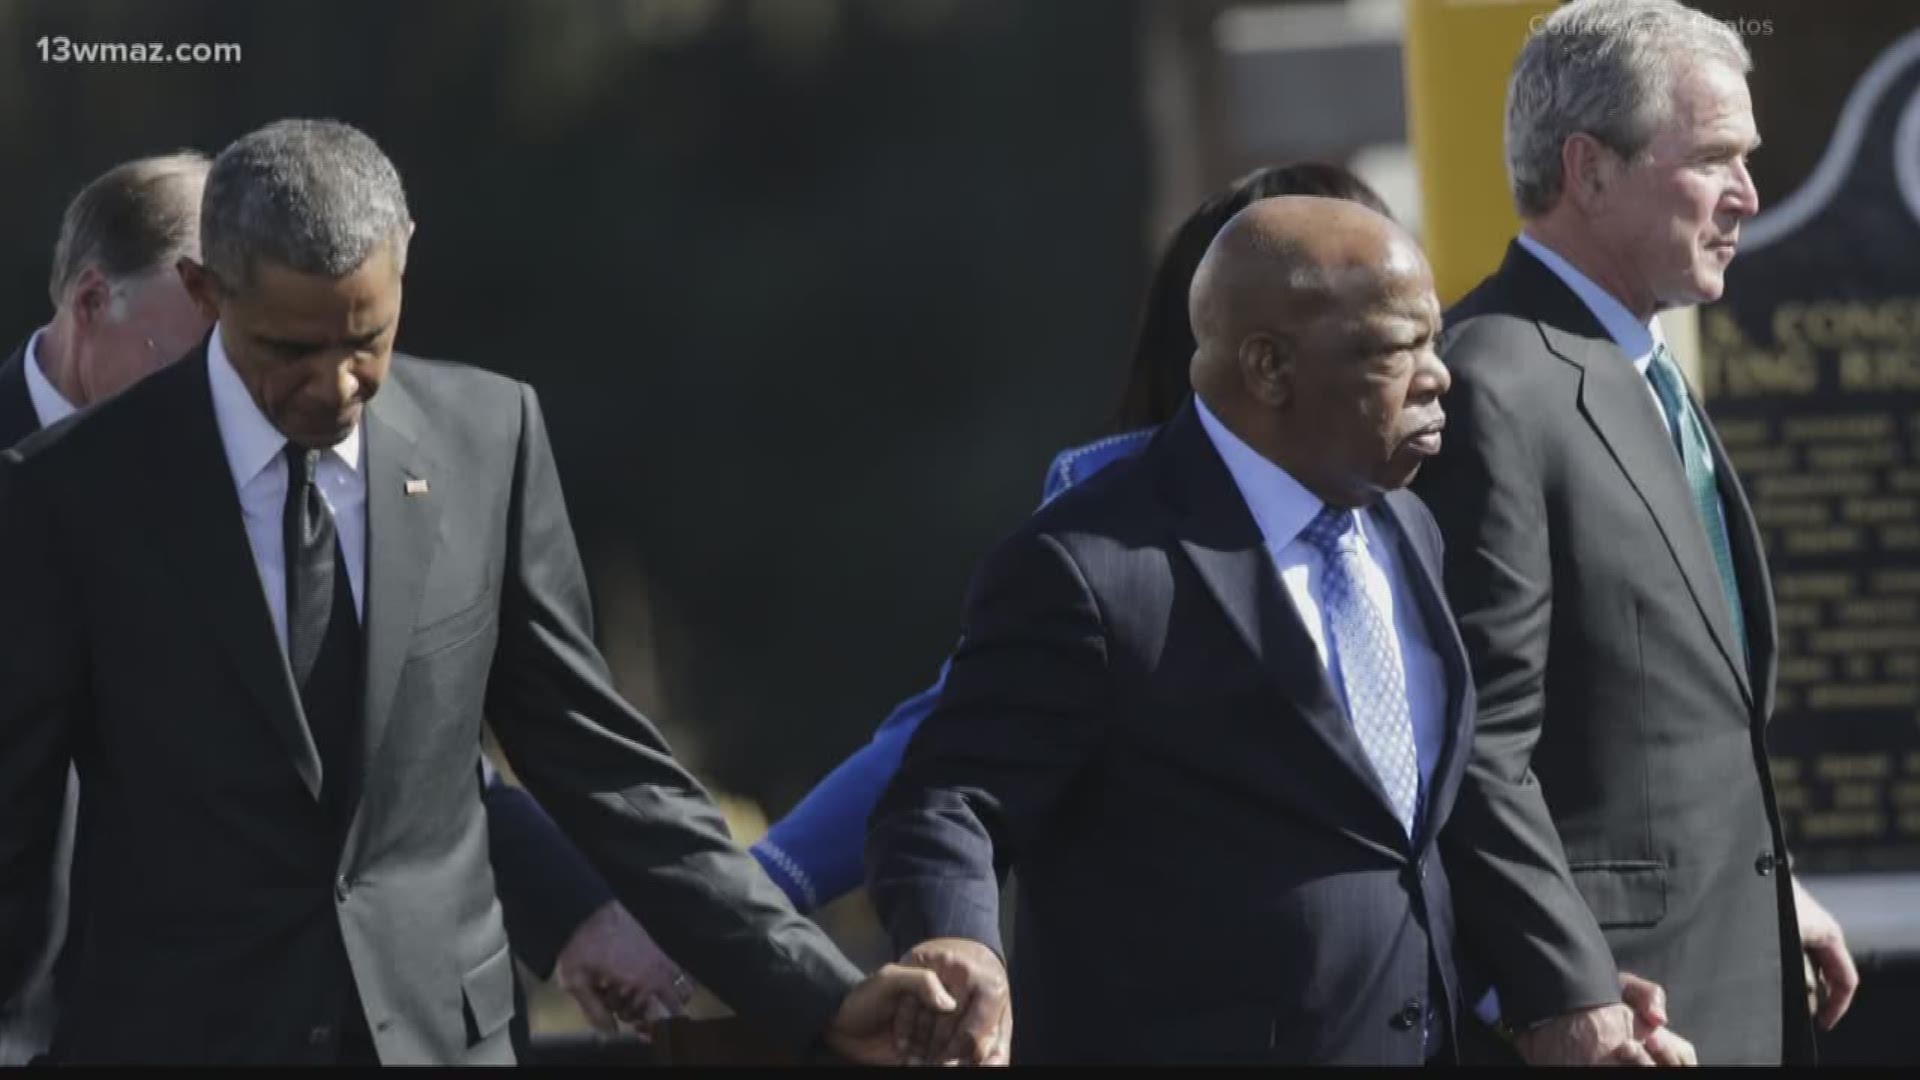 Congressman John Lewis has fought for civil rights and voting rights, but now, he could be in his toughest battle yet -- the fight against stage IV pancreatic cancer